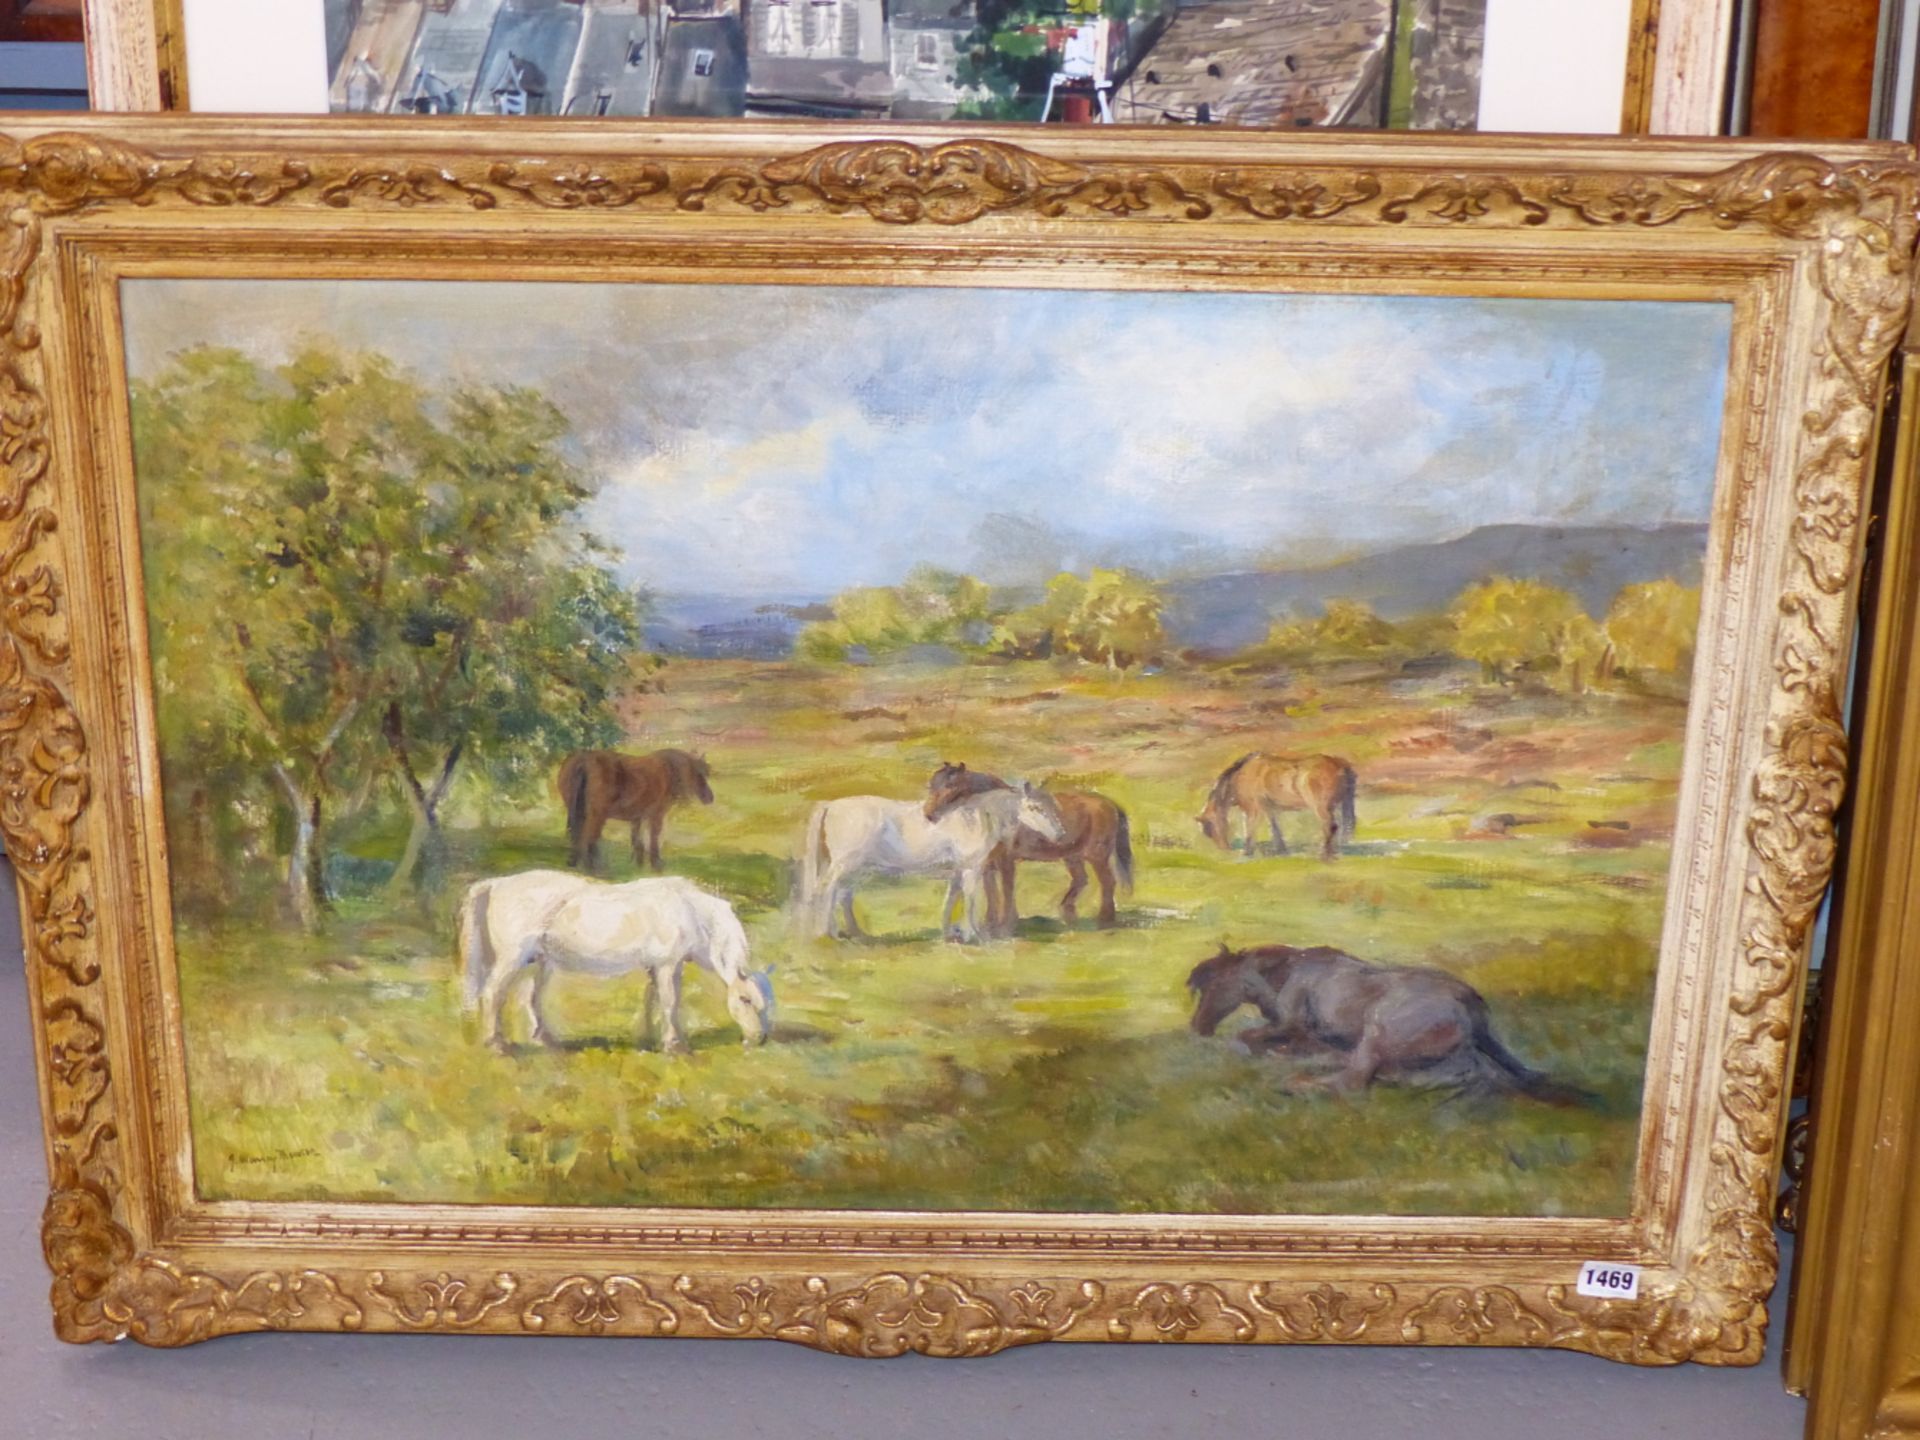 J. MURRAY THOMSON (1885-1974) ARR. GRAZING, SIGNED, OIL ON CANVAS. 50 x 77cms - Image 3 of 5